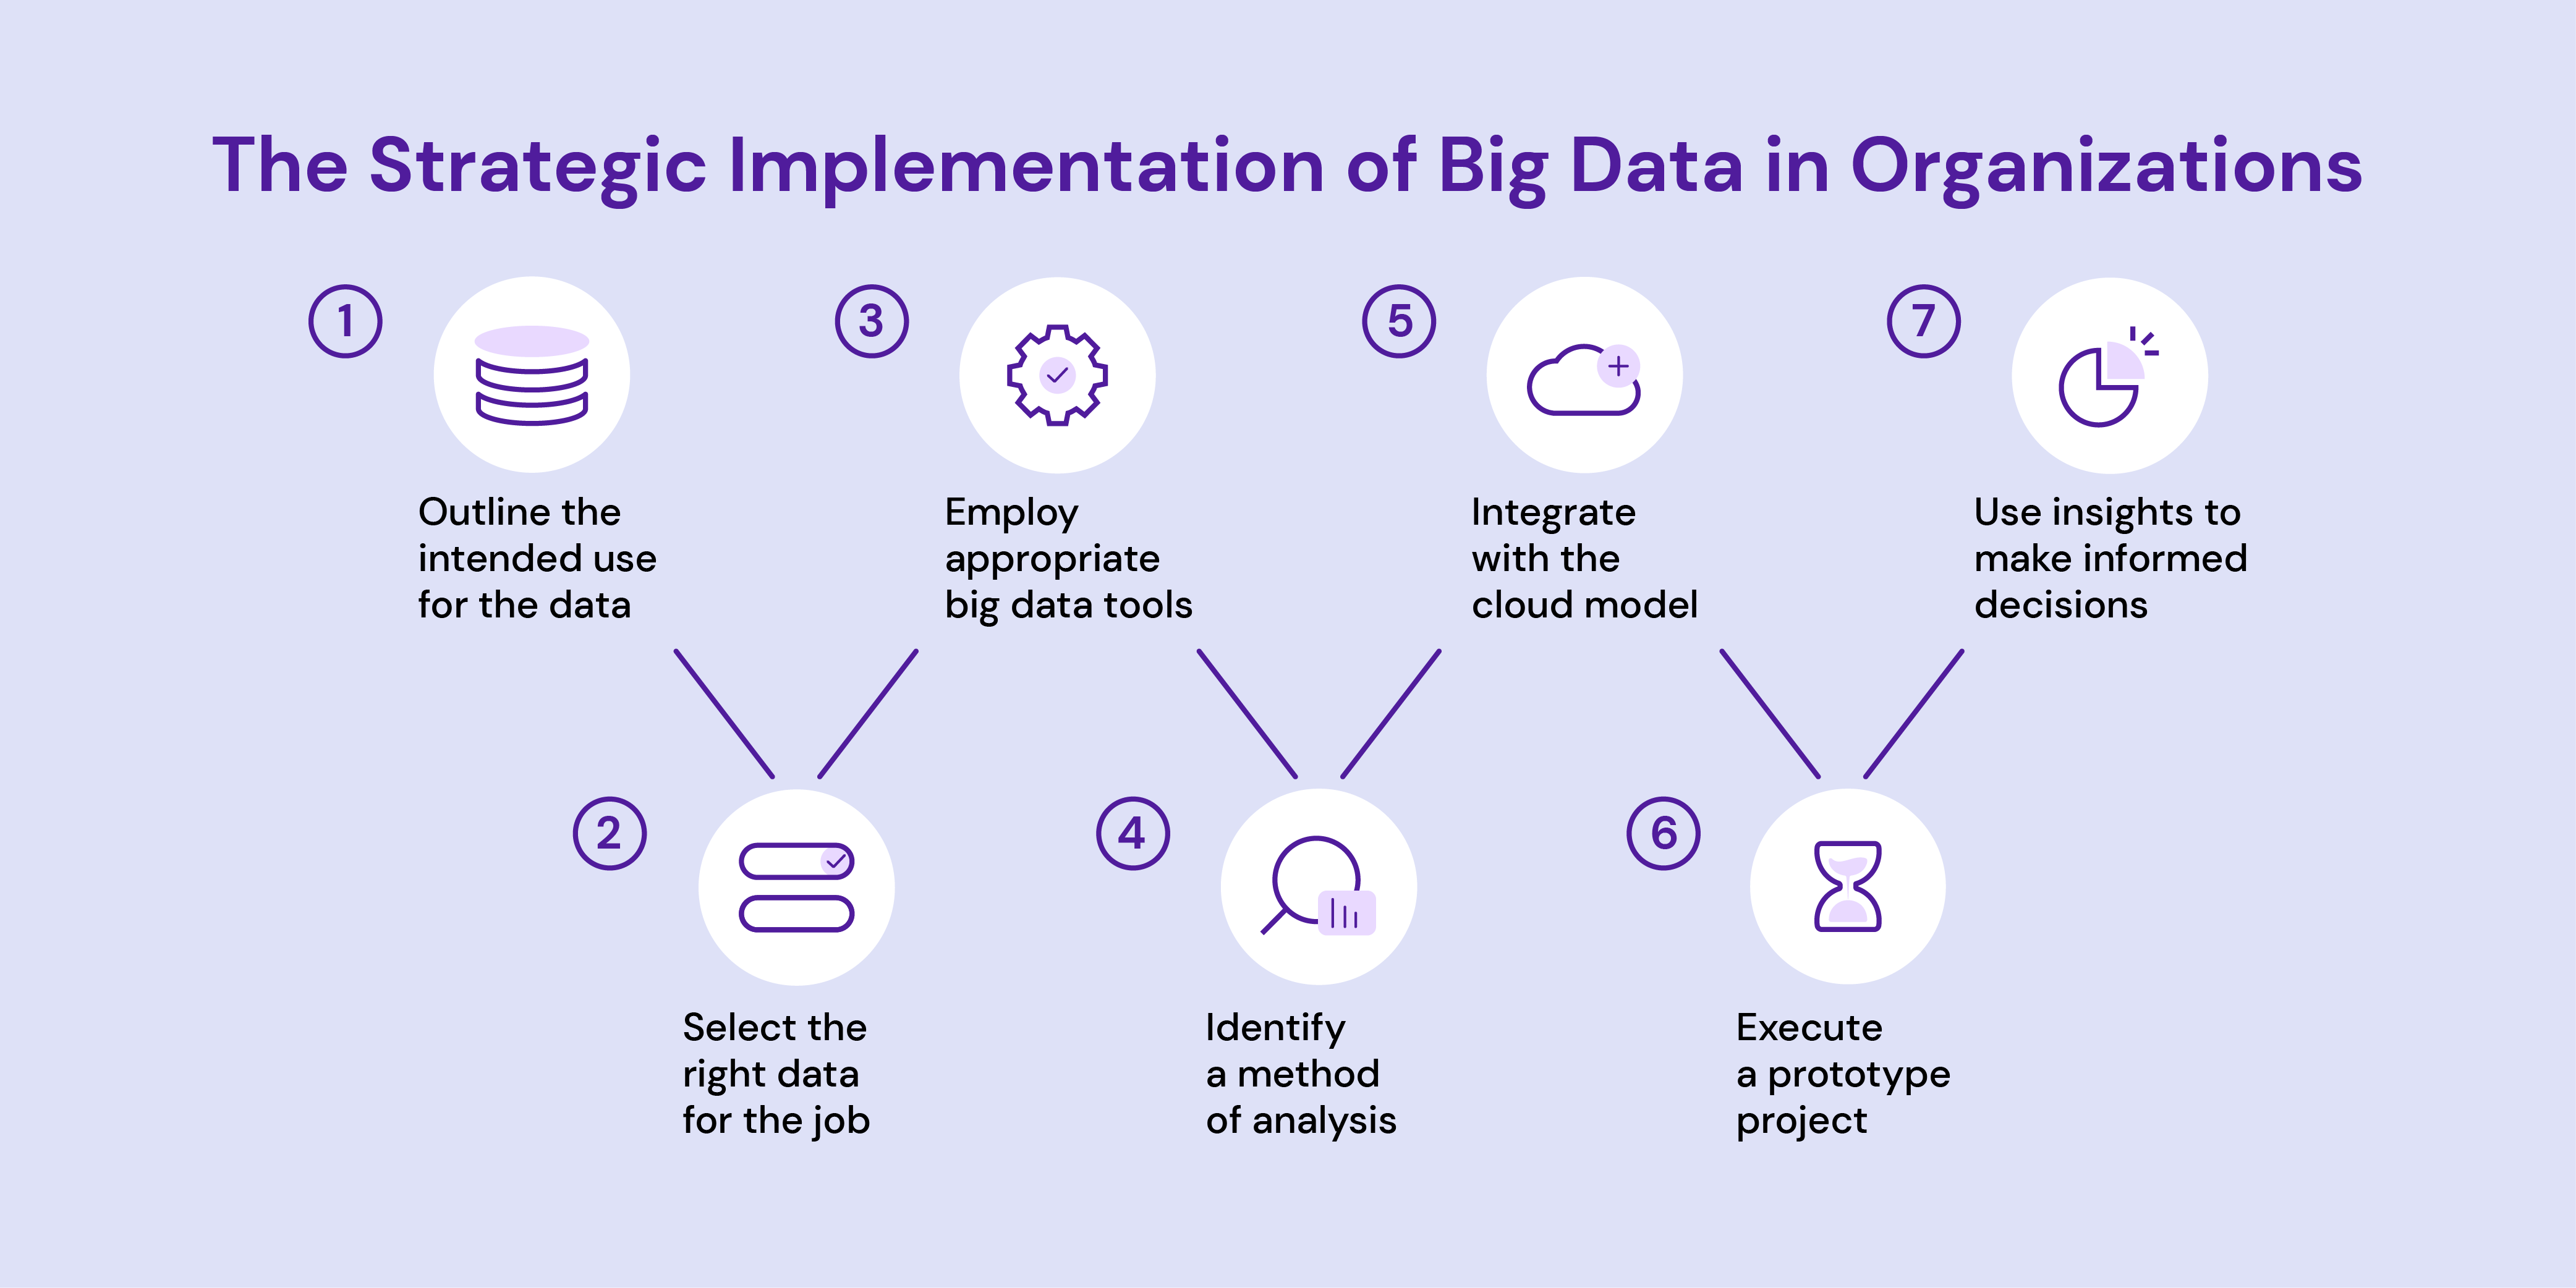 The Strategic Implementation of Big Data in Organizations